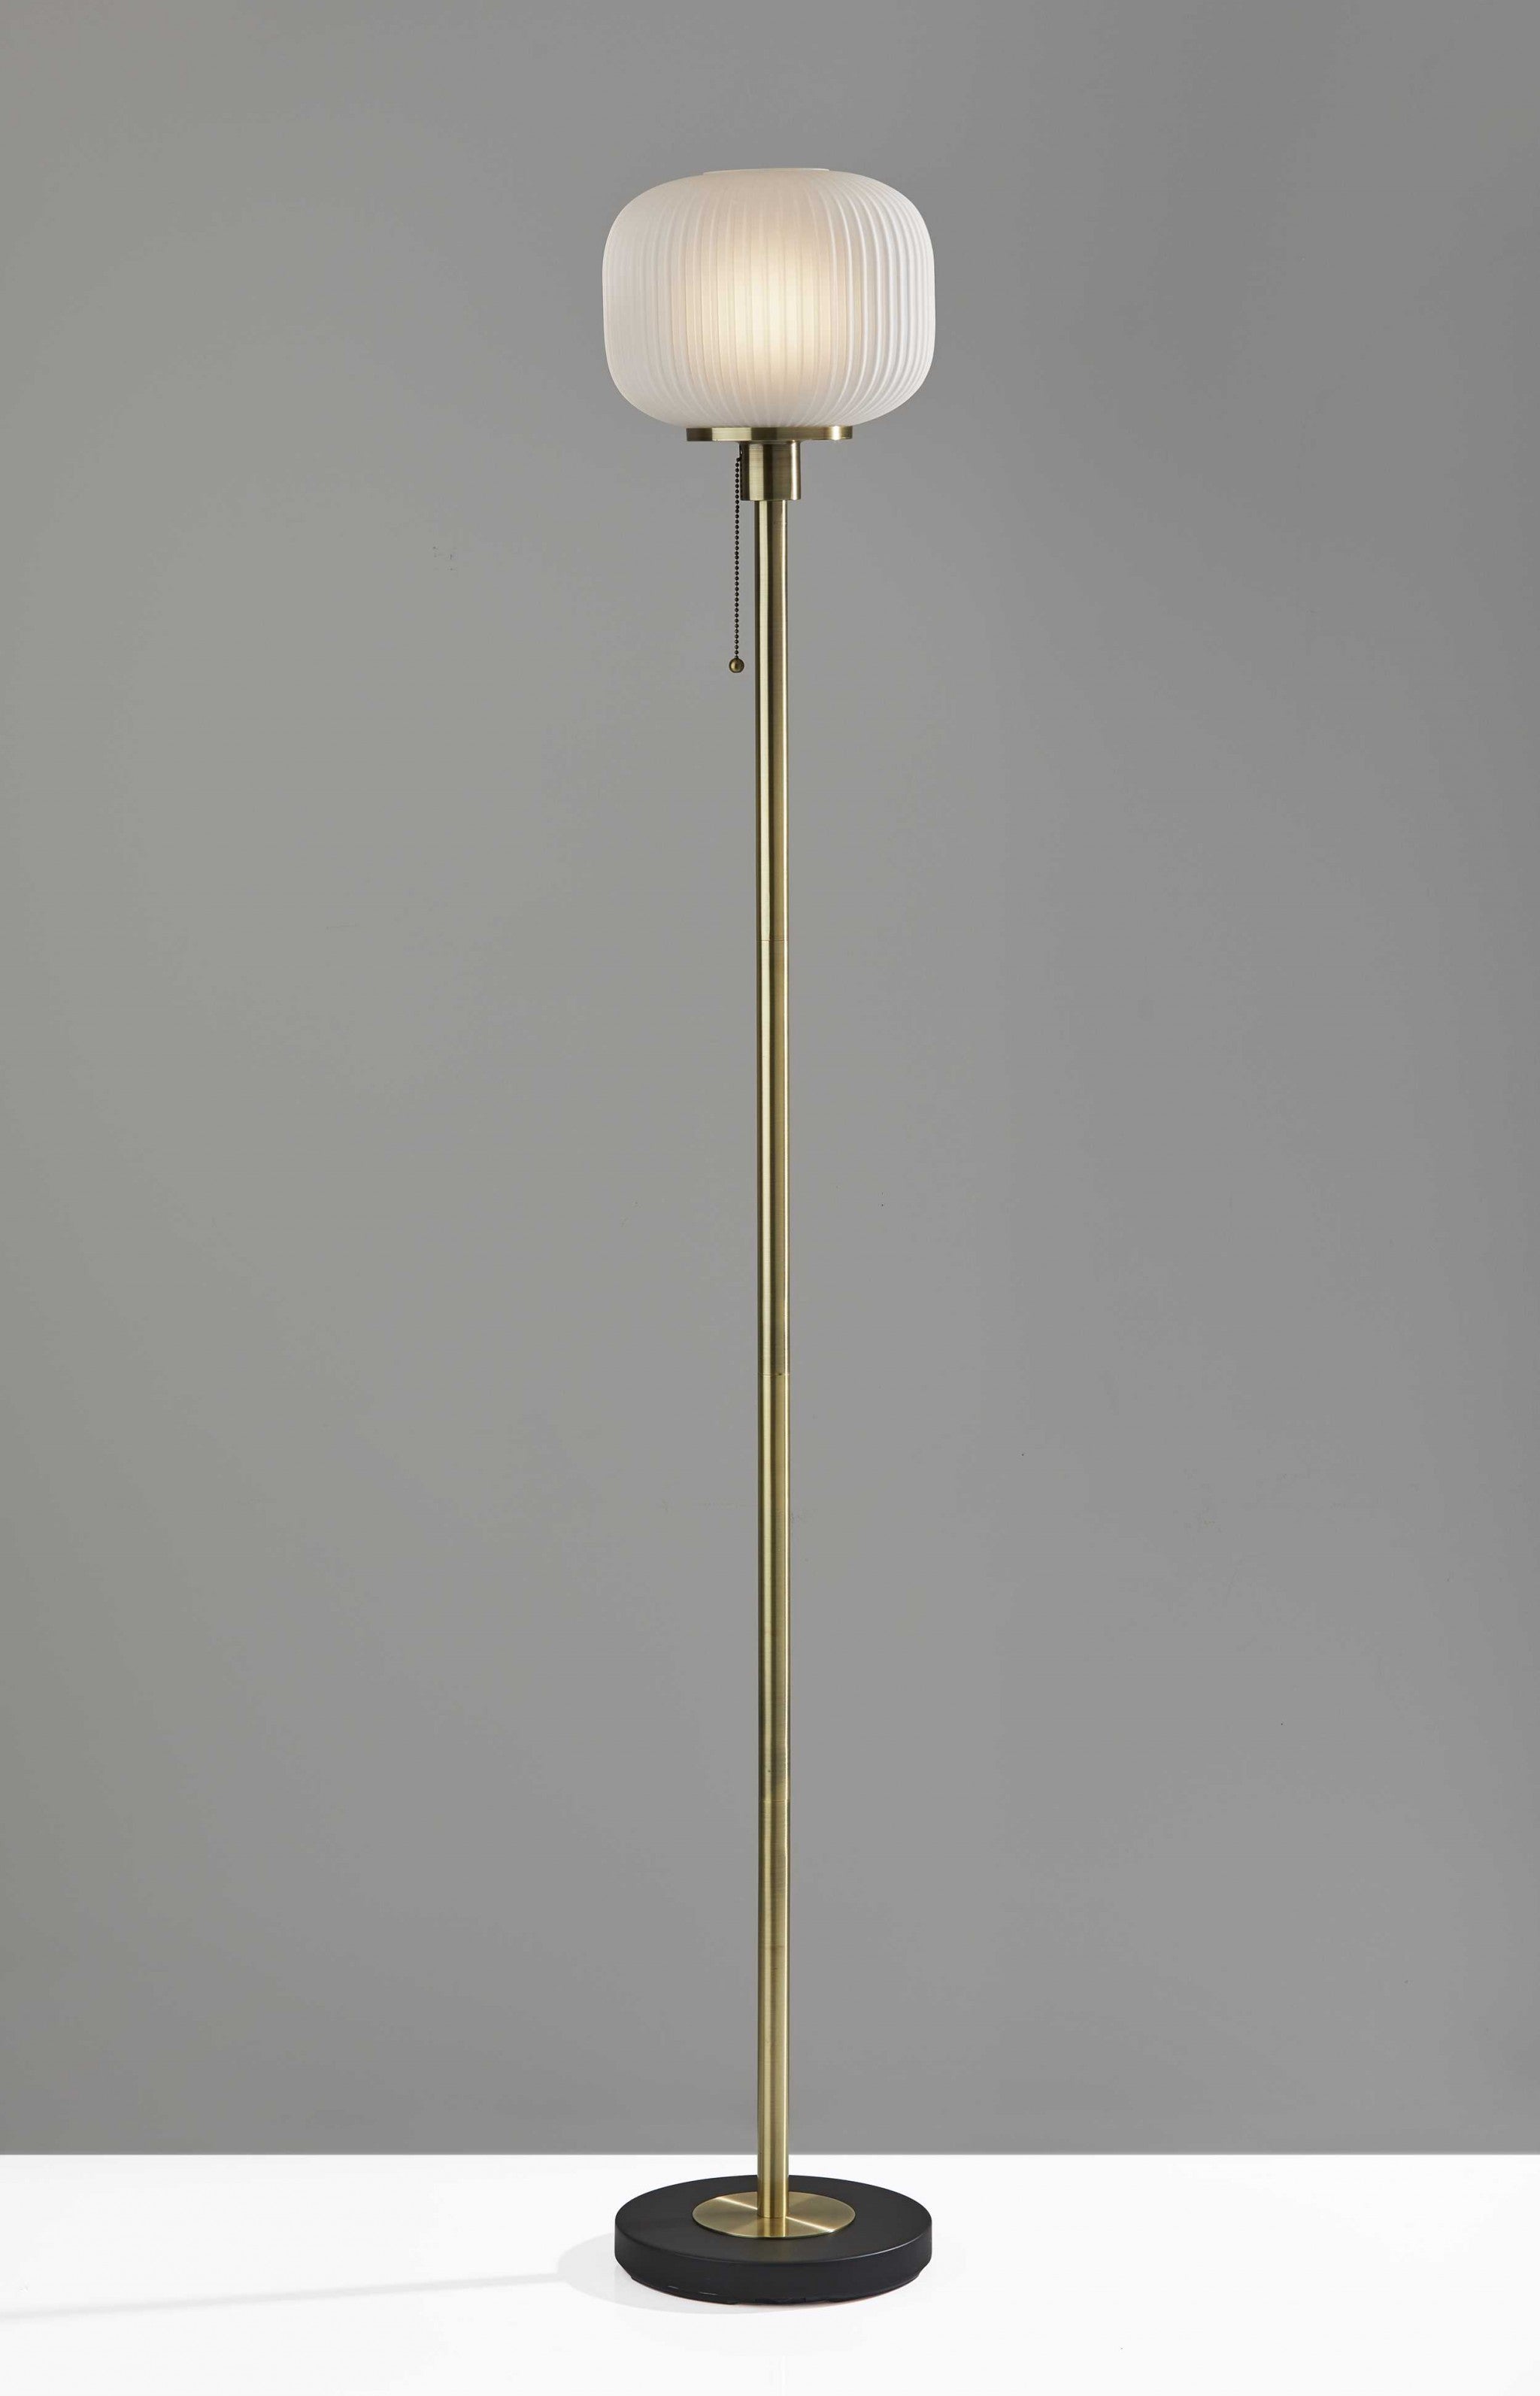 65" Black Torchiere Floor Lamp With White Globe Shade